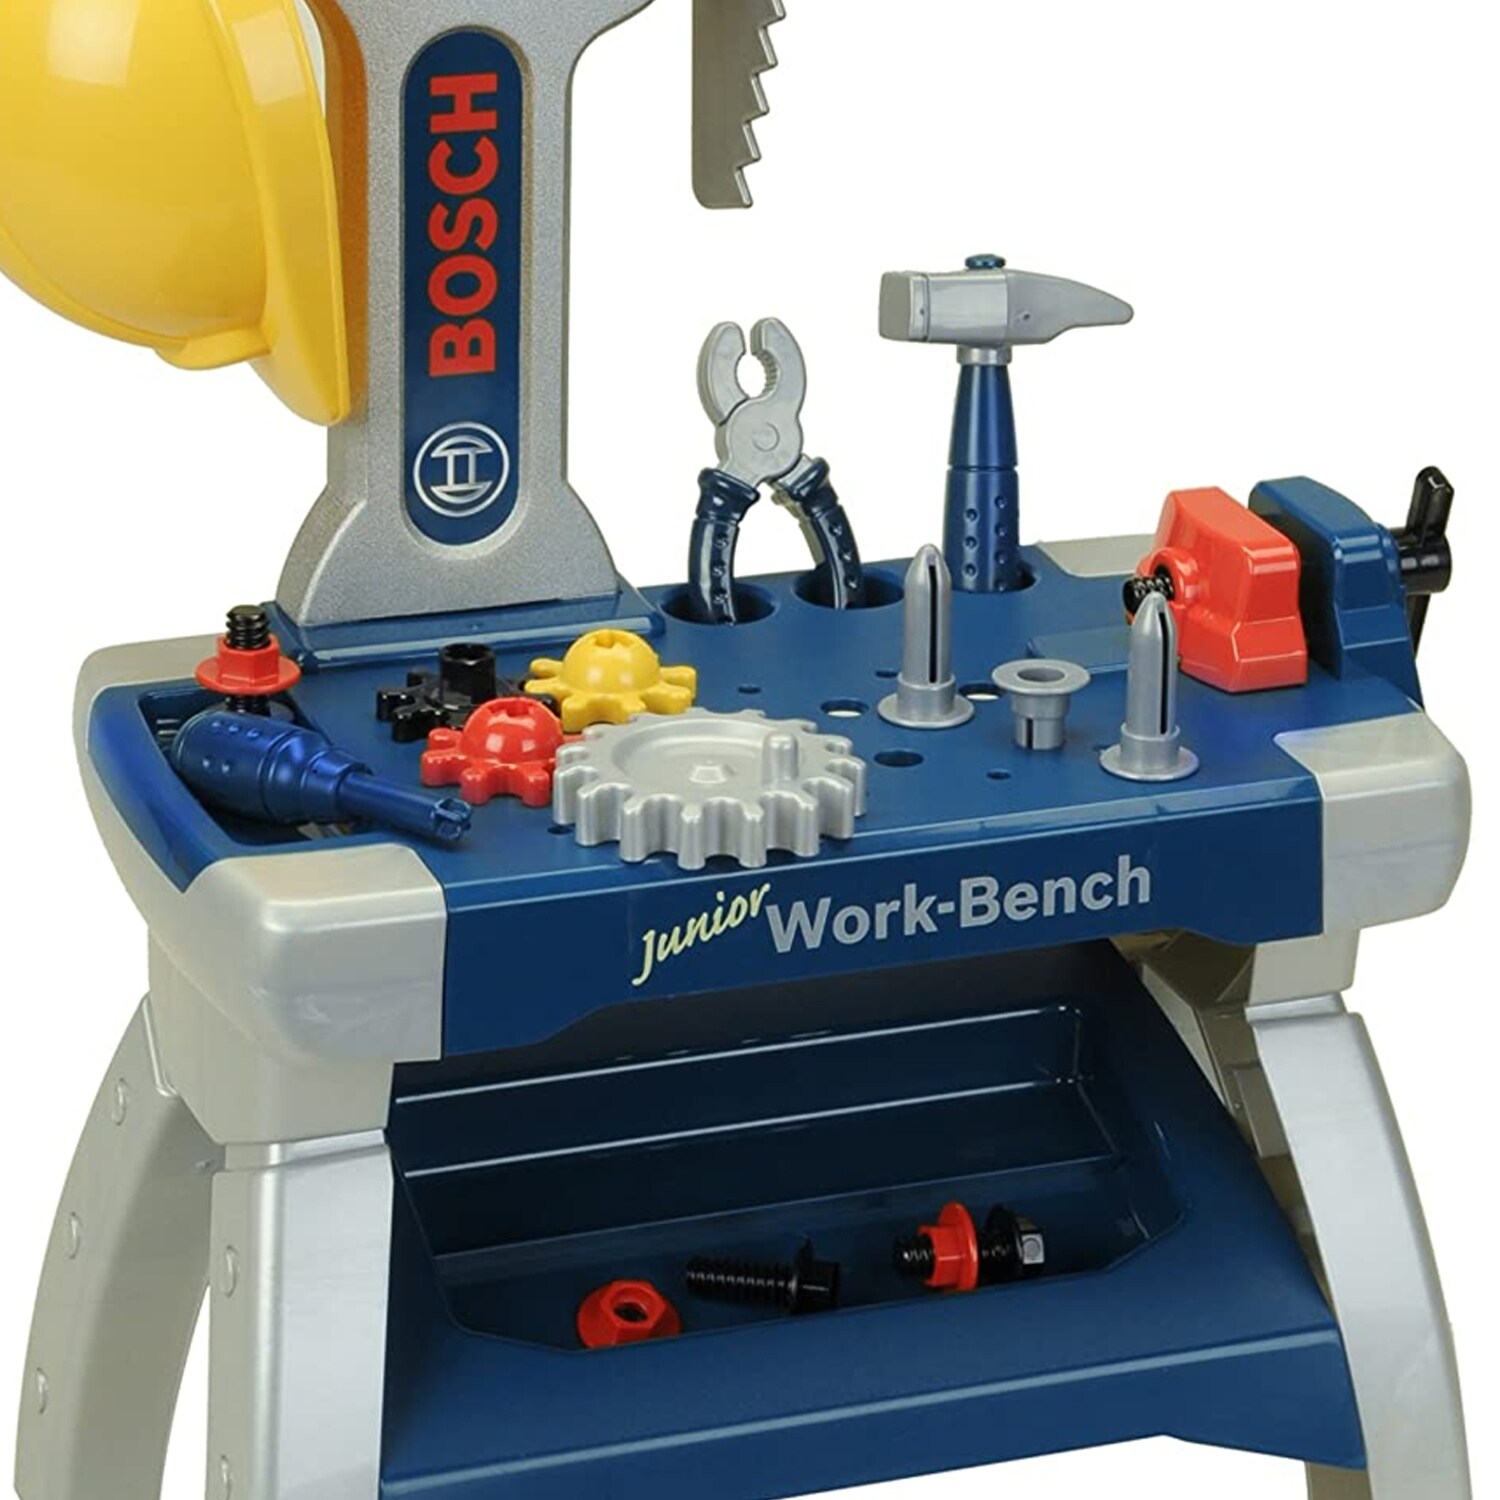 https://ak1.ostkcdn.com/images/products/is/images/direct/812d9785a242e8b4f26b500858f91454e3311d5a/Theo-Klein-Bosch-Junior-Workbench-Kids-Premium-Toy-Toolset-for-Ages-3-%26-Up.jpg